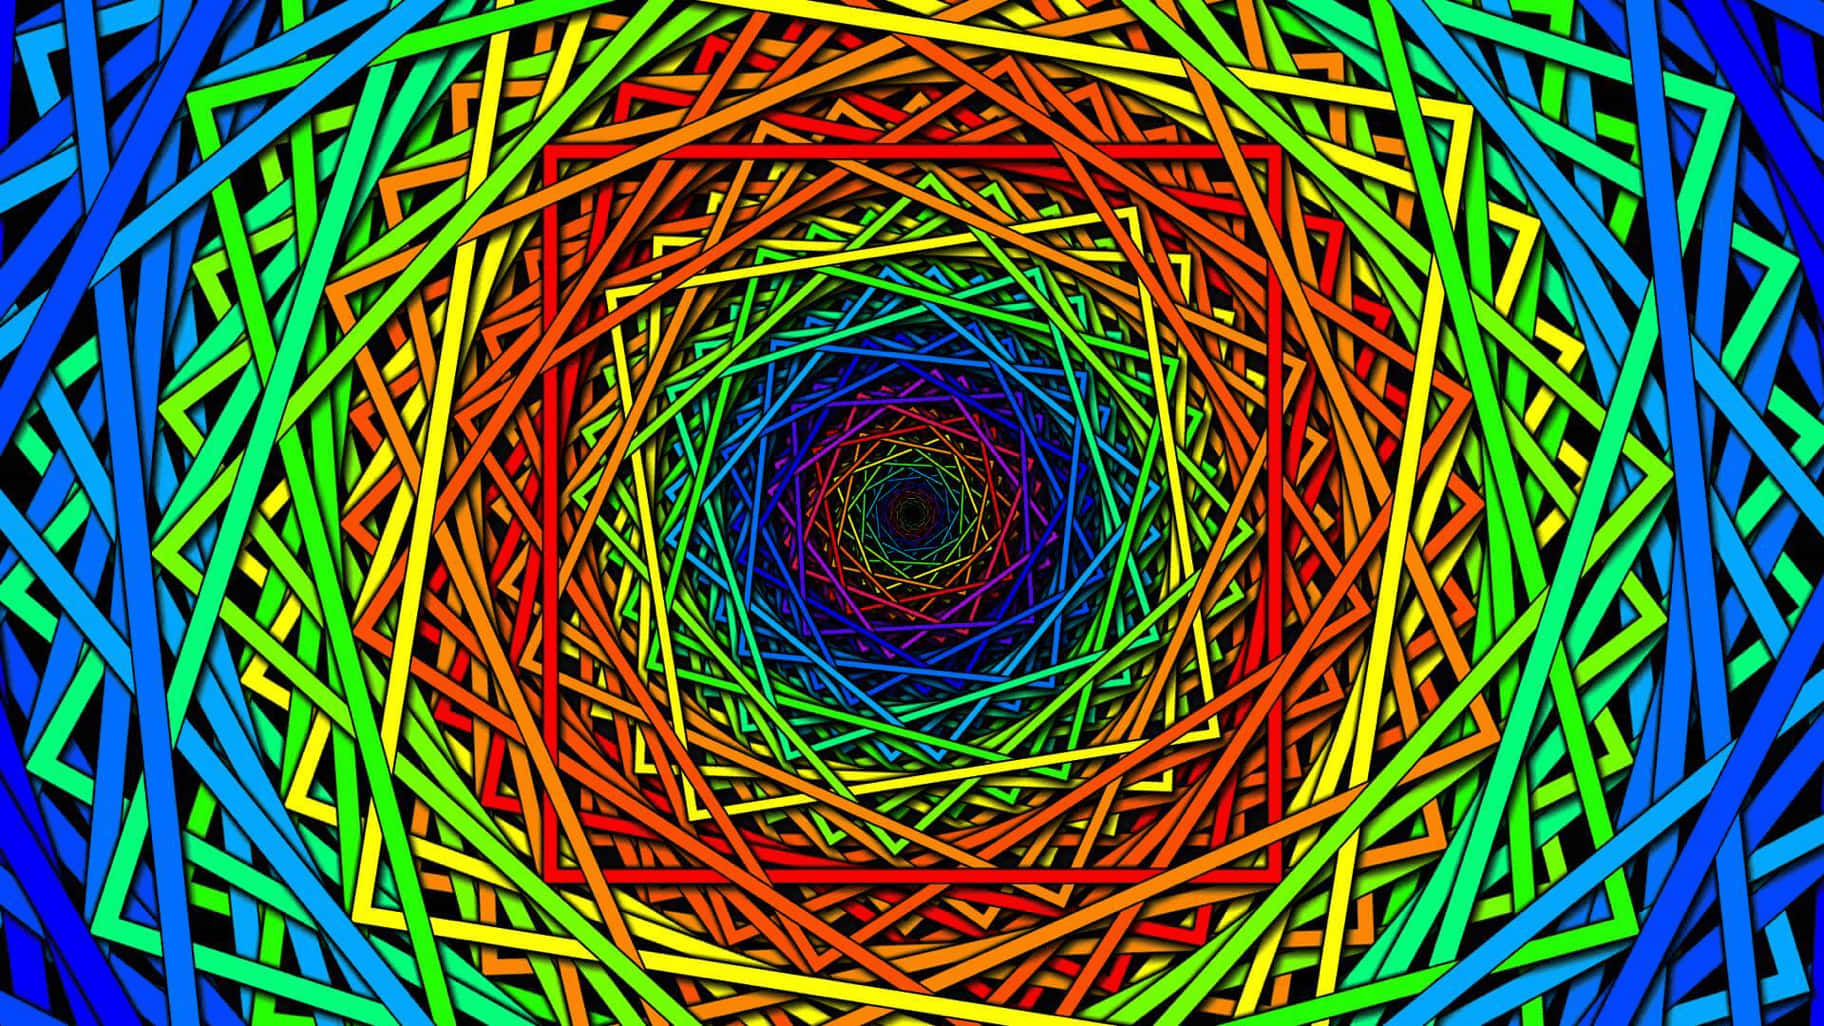 A Colorful Spiral Of Colored Lines